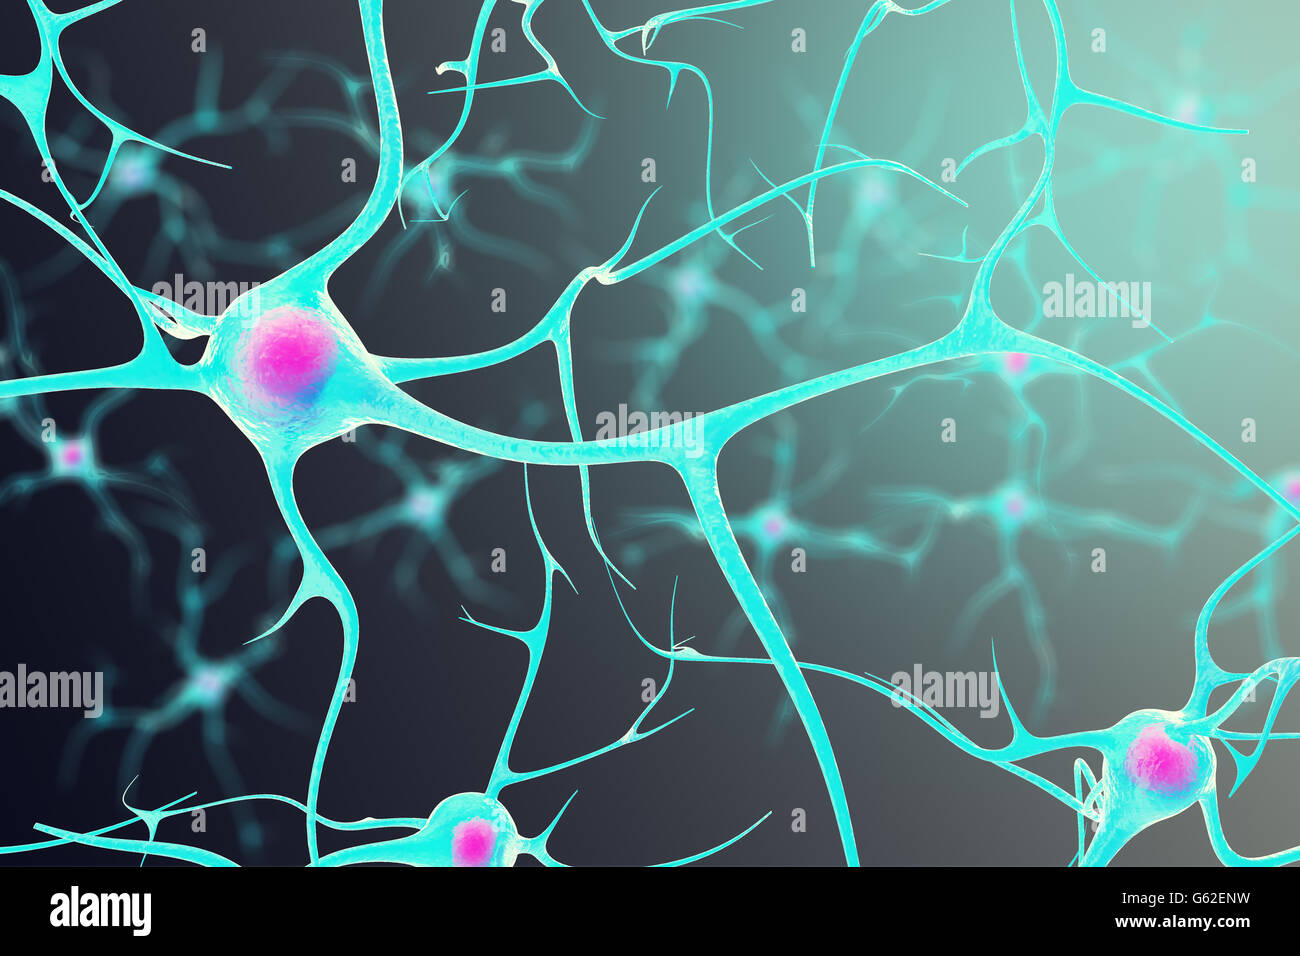 Neurons in the brain with a nucleus inside on black background. 3d illustration Stock Photo